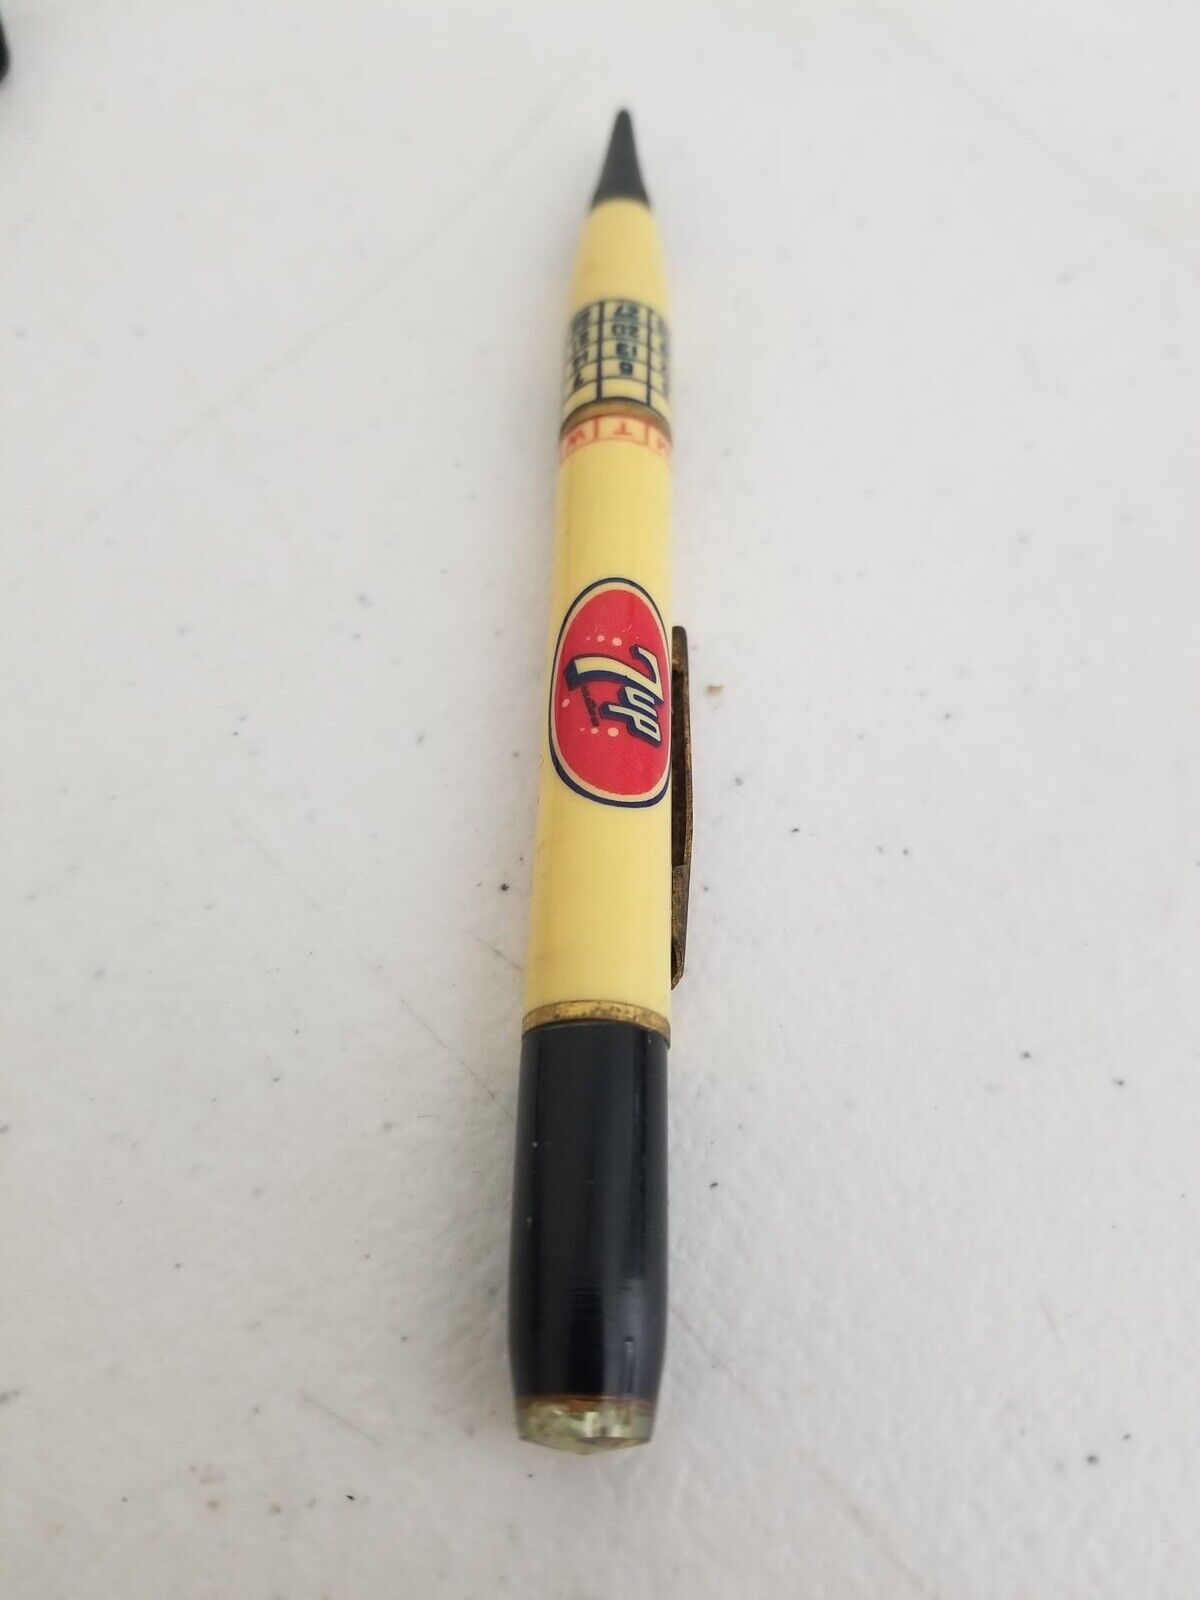 Vintage 7Up Promotional Mechanical Pencil by Sheaffer - Rare Collectible Advertising Memorabilia - TreasuTiques